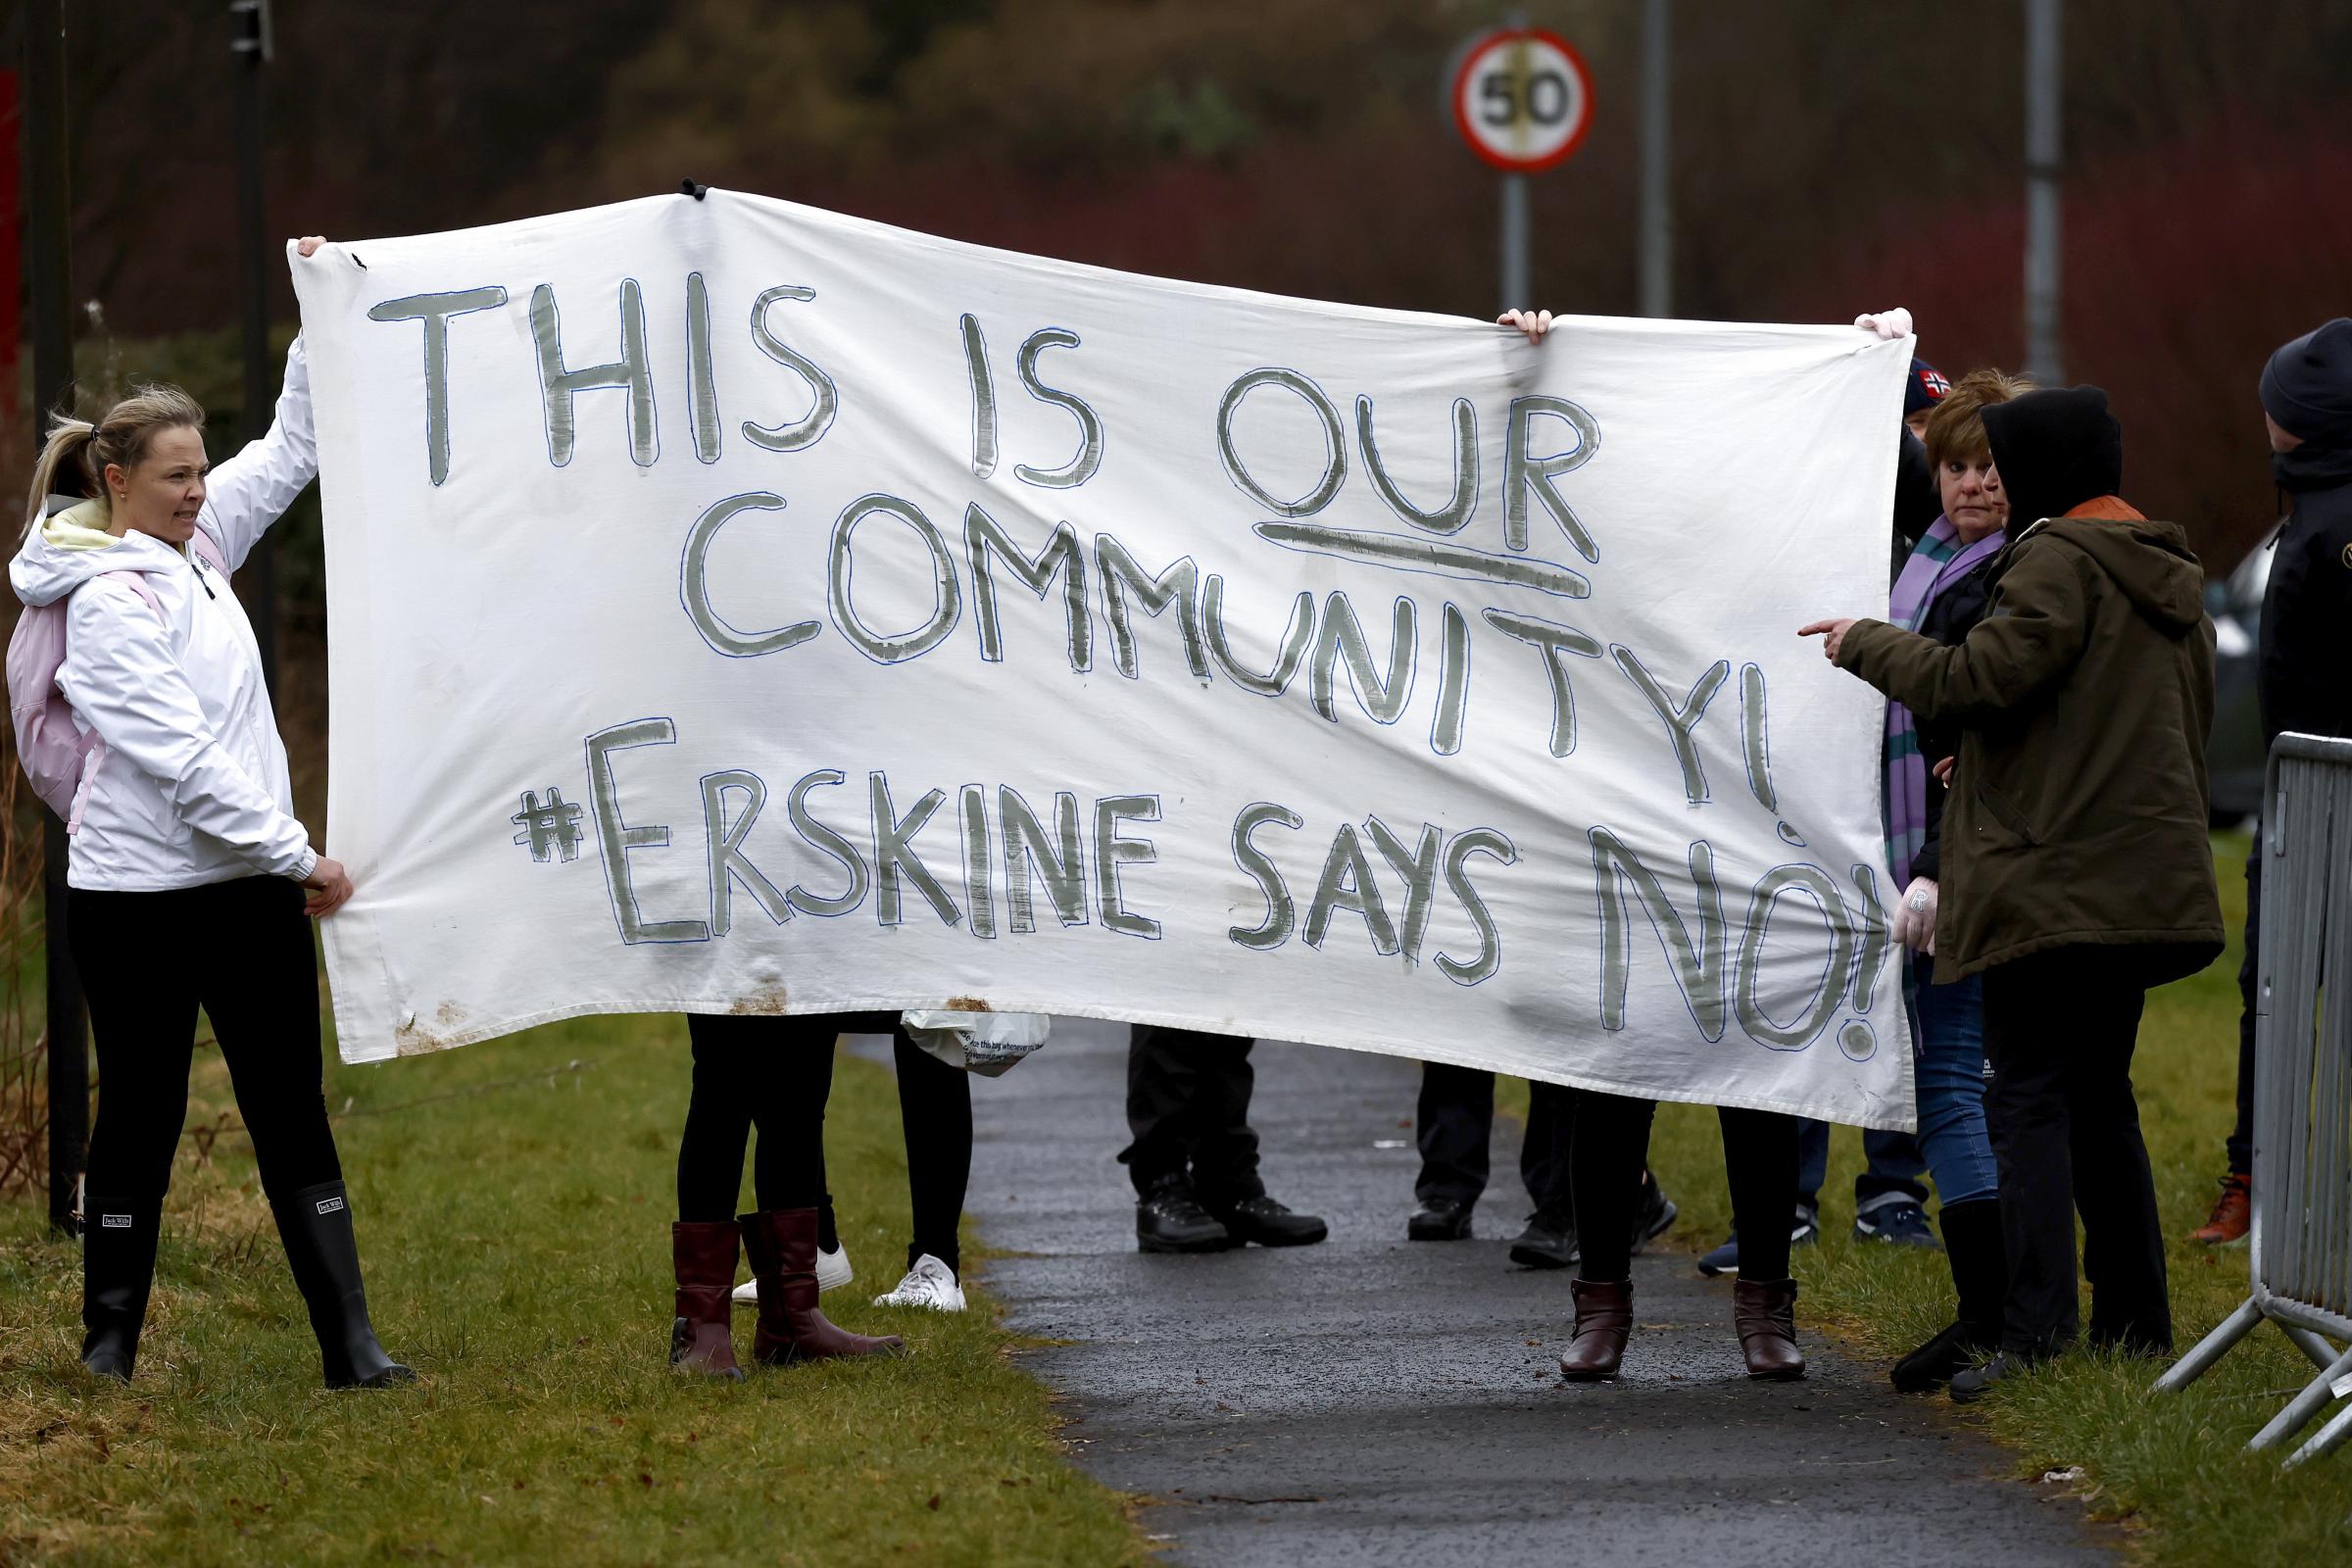 ERSKINE, SCOTLAND - MARCH 12: Members of the Patriotic Alternative protest outside the Muthu Glasgow Hotel which is housing refugees on March 12, 2023 in Erskine, Scotland. The Home Office and MEARS have placed detained asylum seekers in the Muthu